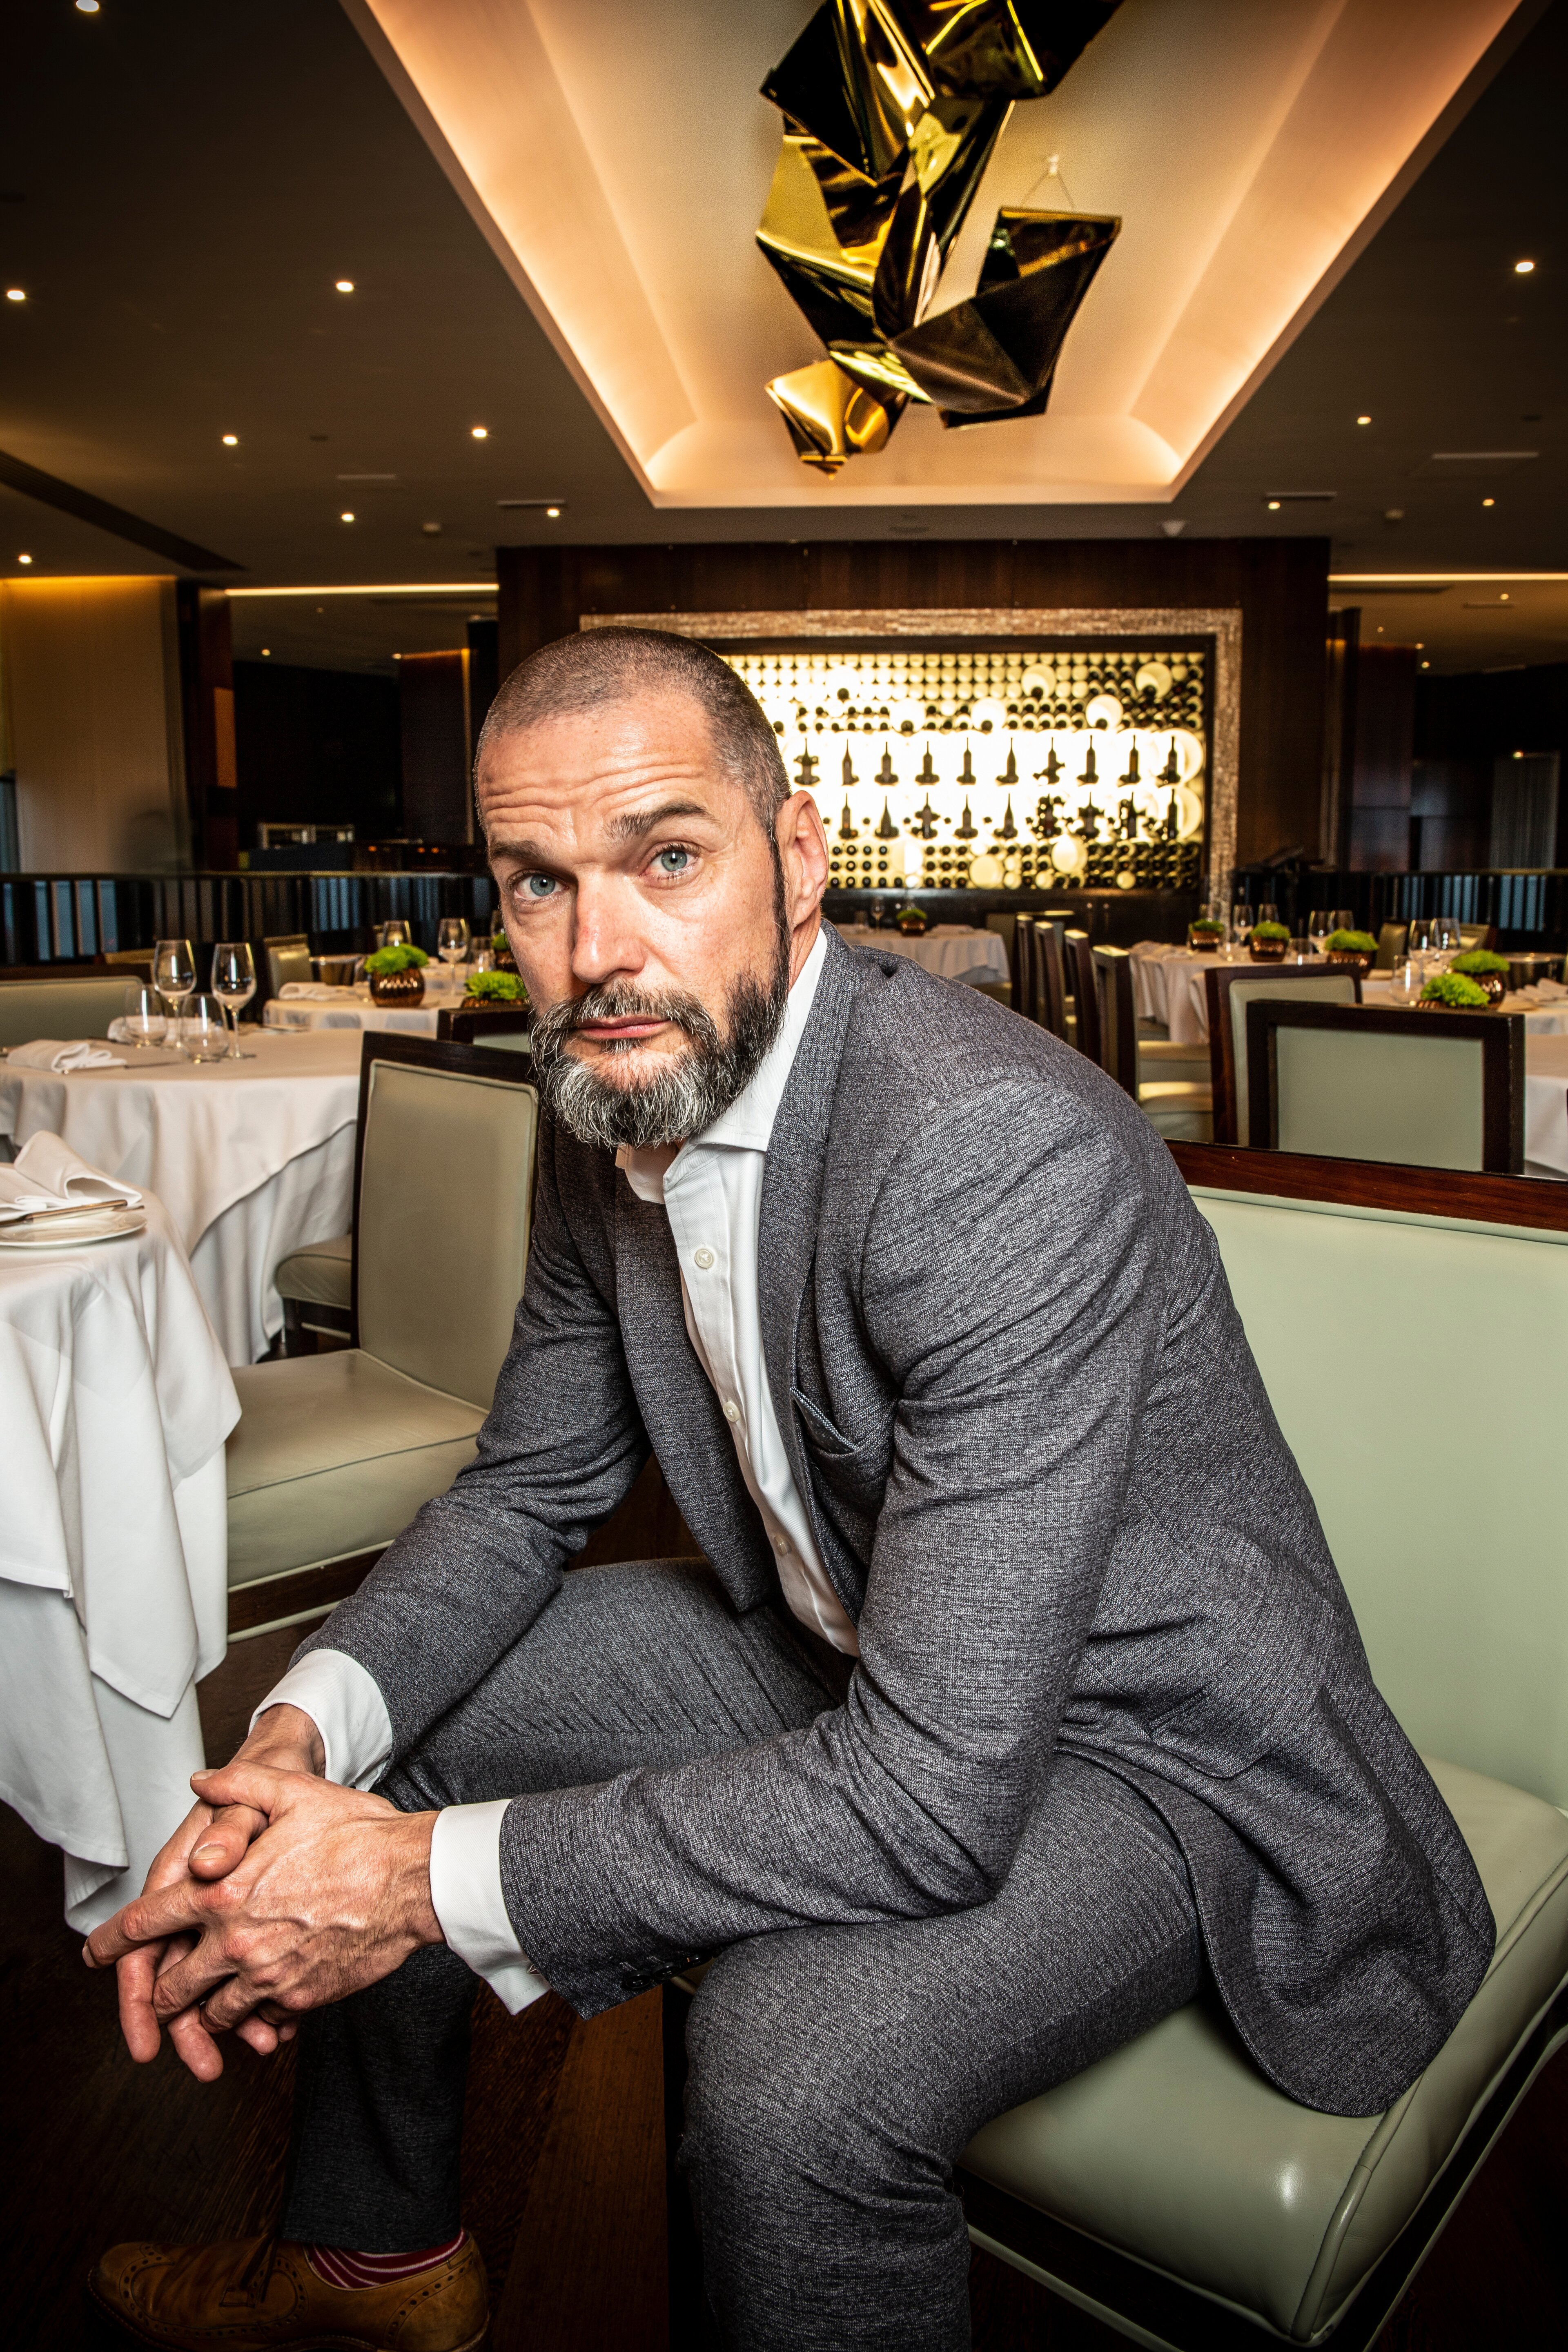 Fred Sirieix made to feel like a “second-class citizen” in application for permanent residency